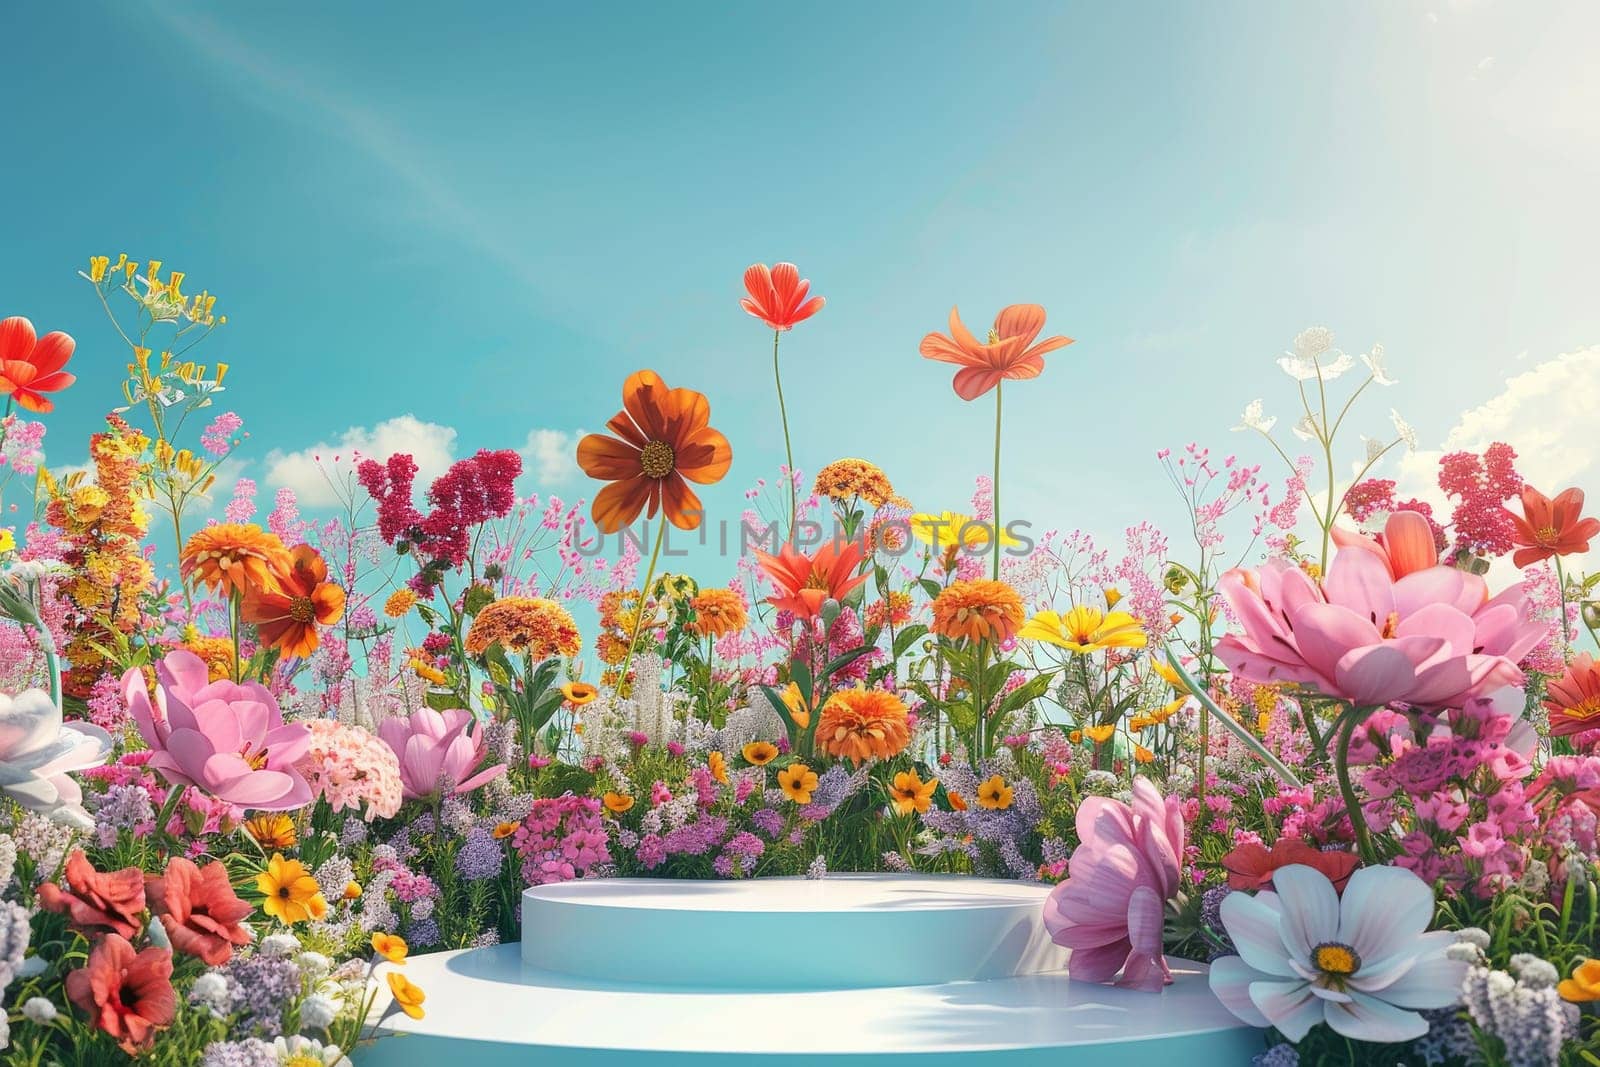 A beautiful field of flowers with a white pedestal in the middle. The flowers are in full bloom and the sky is clear and blue. Concept of peace and tranquility, as well as the beauty of nature